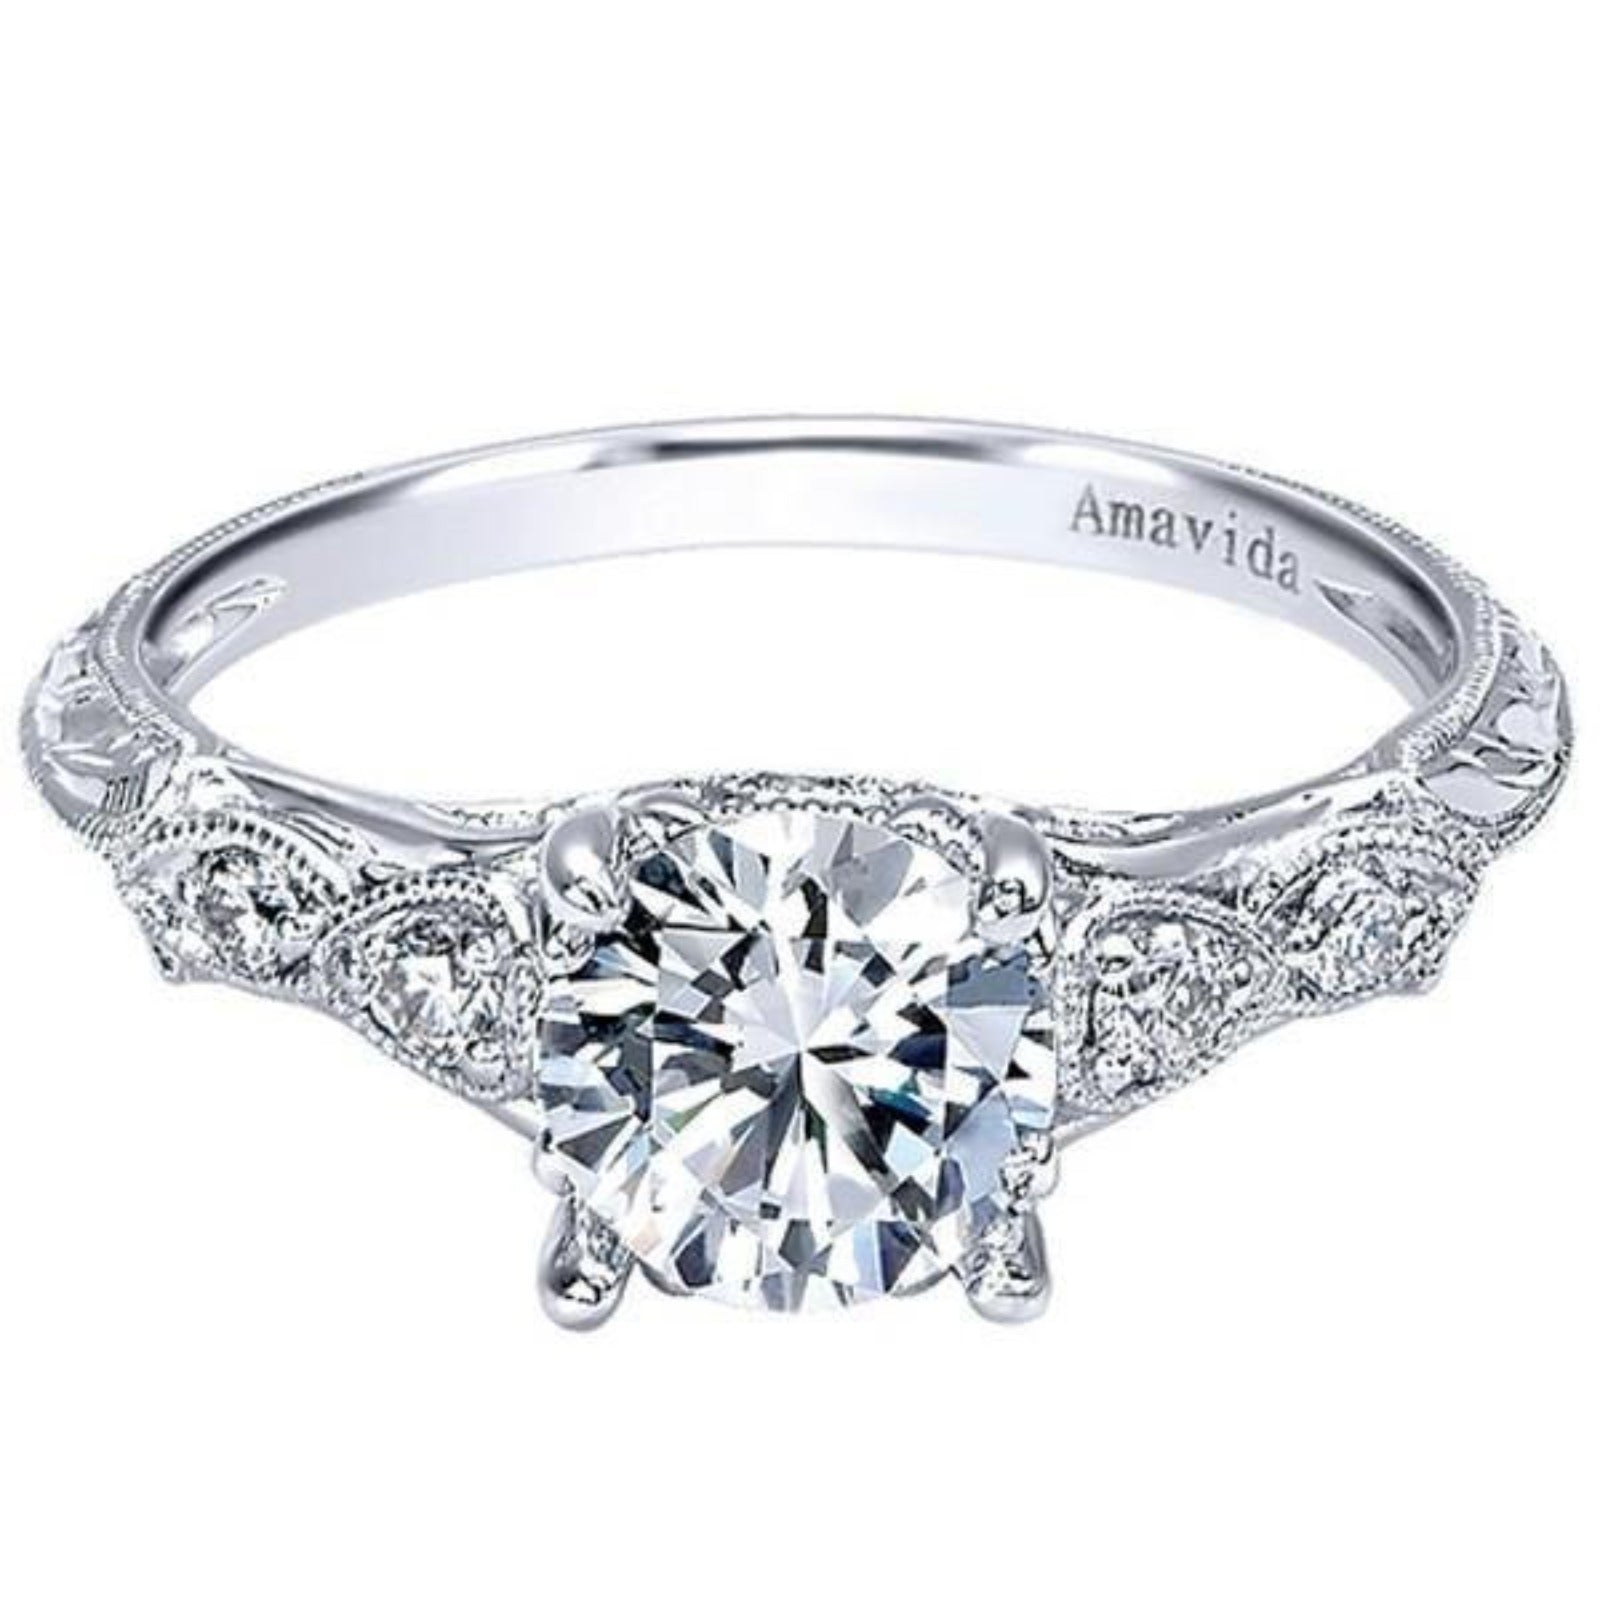 June Rings | Engagement Ring Resizing: Timeline, Cost, and FAQs